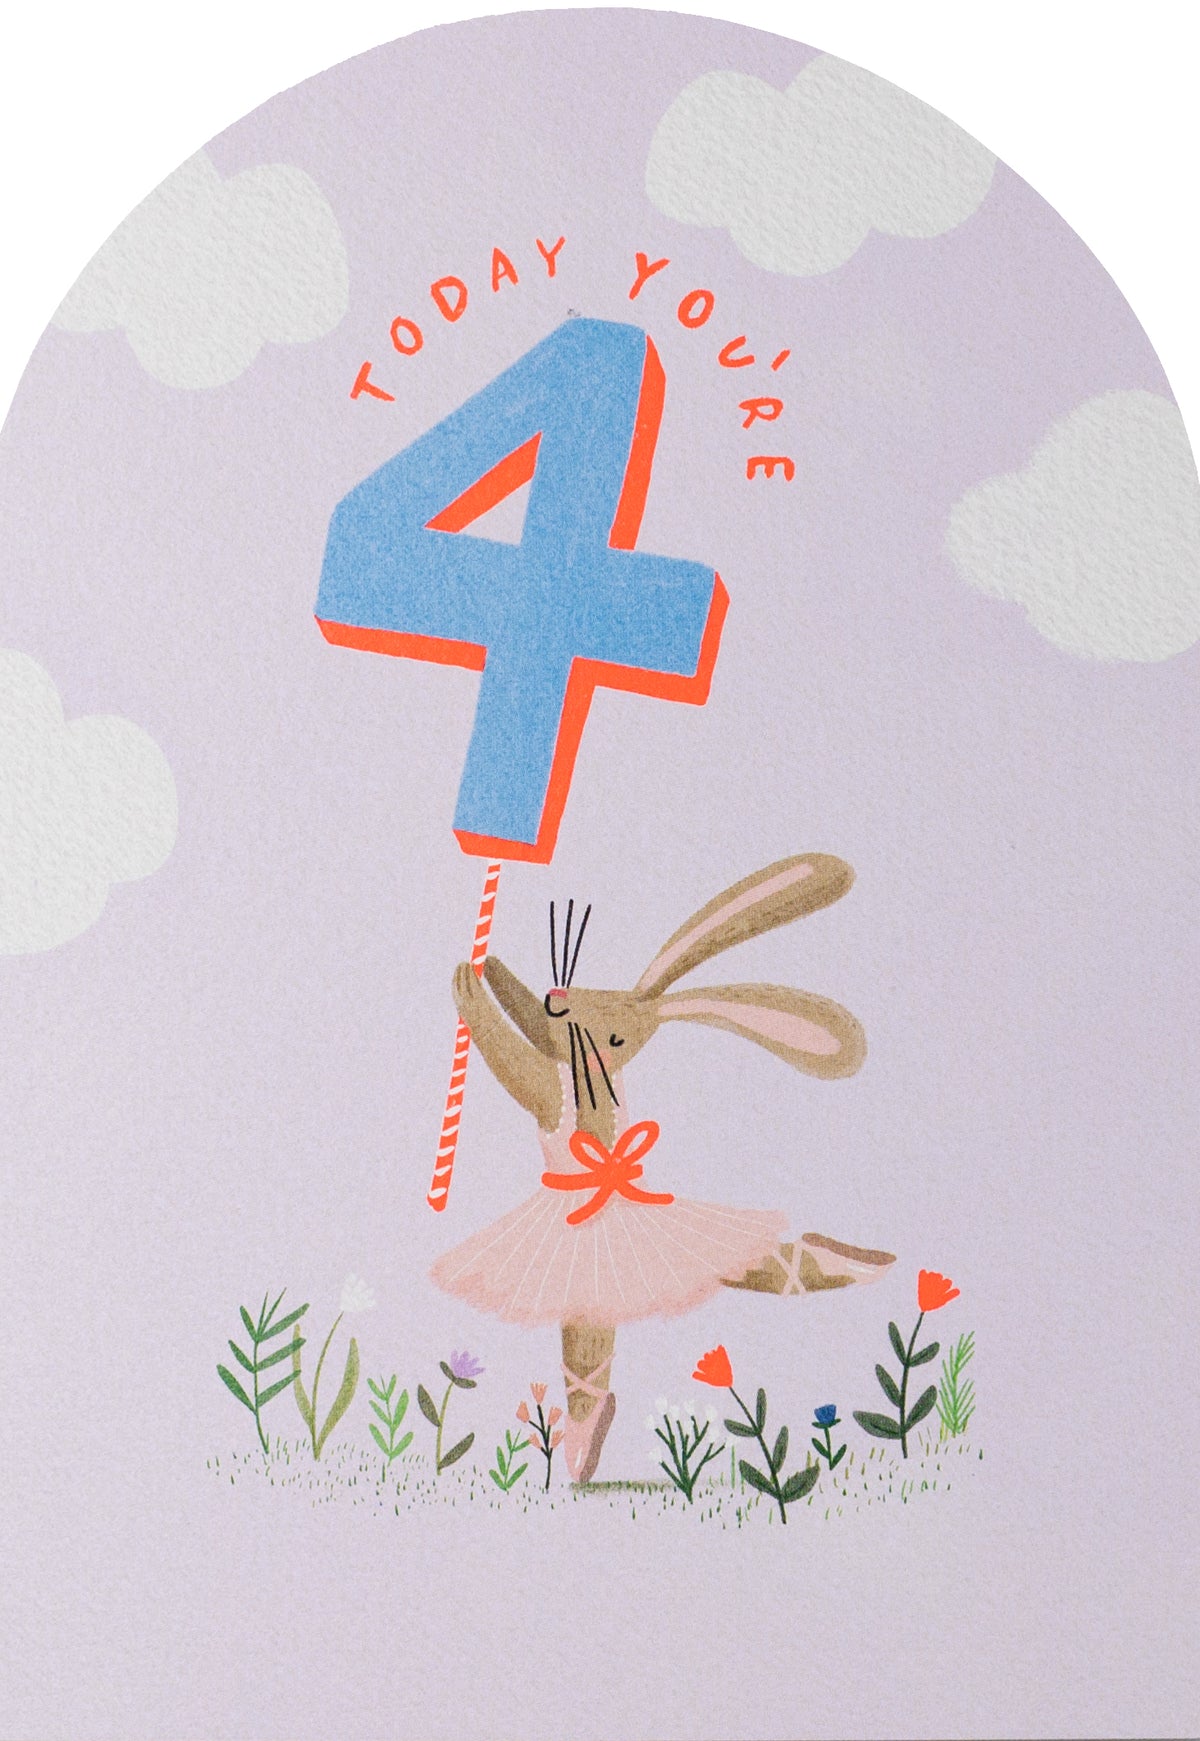 Today 4th Bunny Cut Out Birthday Card from Penny Black